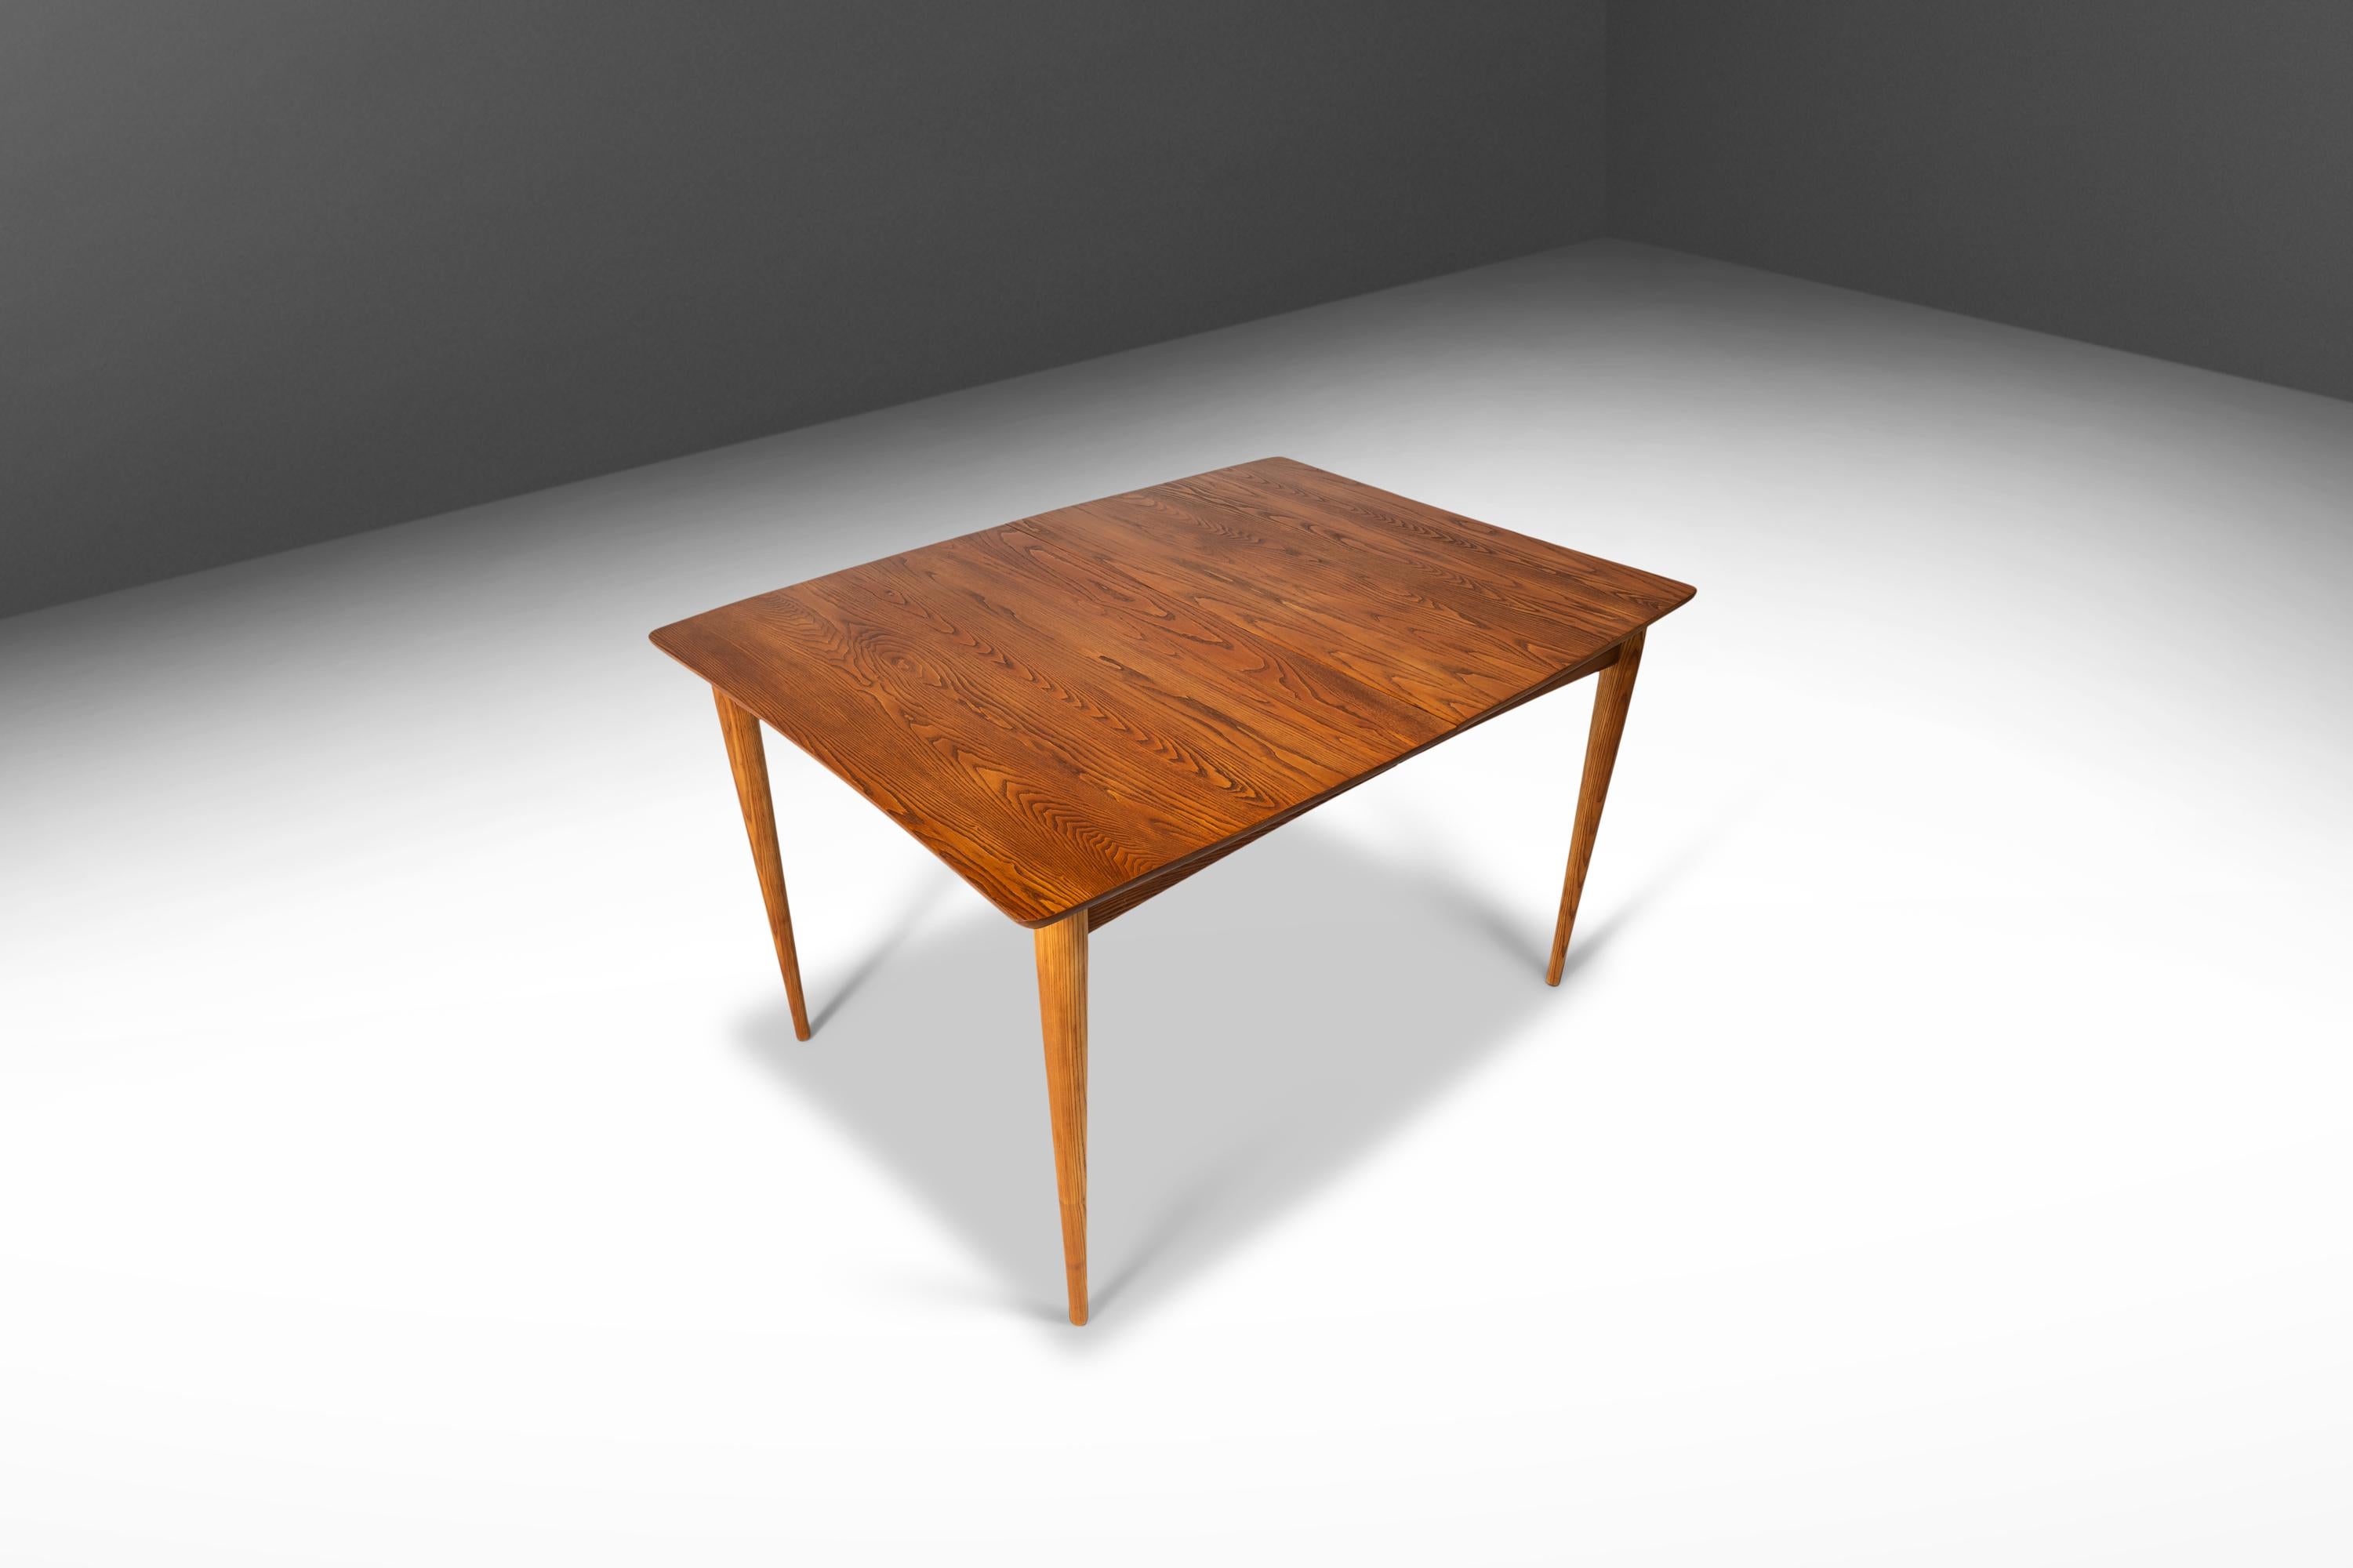 American Angular Mid-Century Modern Extension Dining Table in Solid Oak, Usa, circa 1960s For Sale